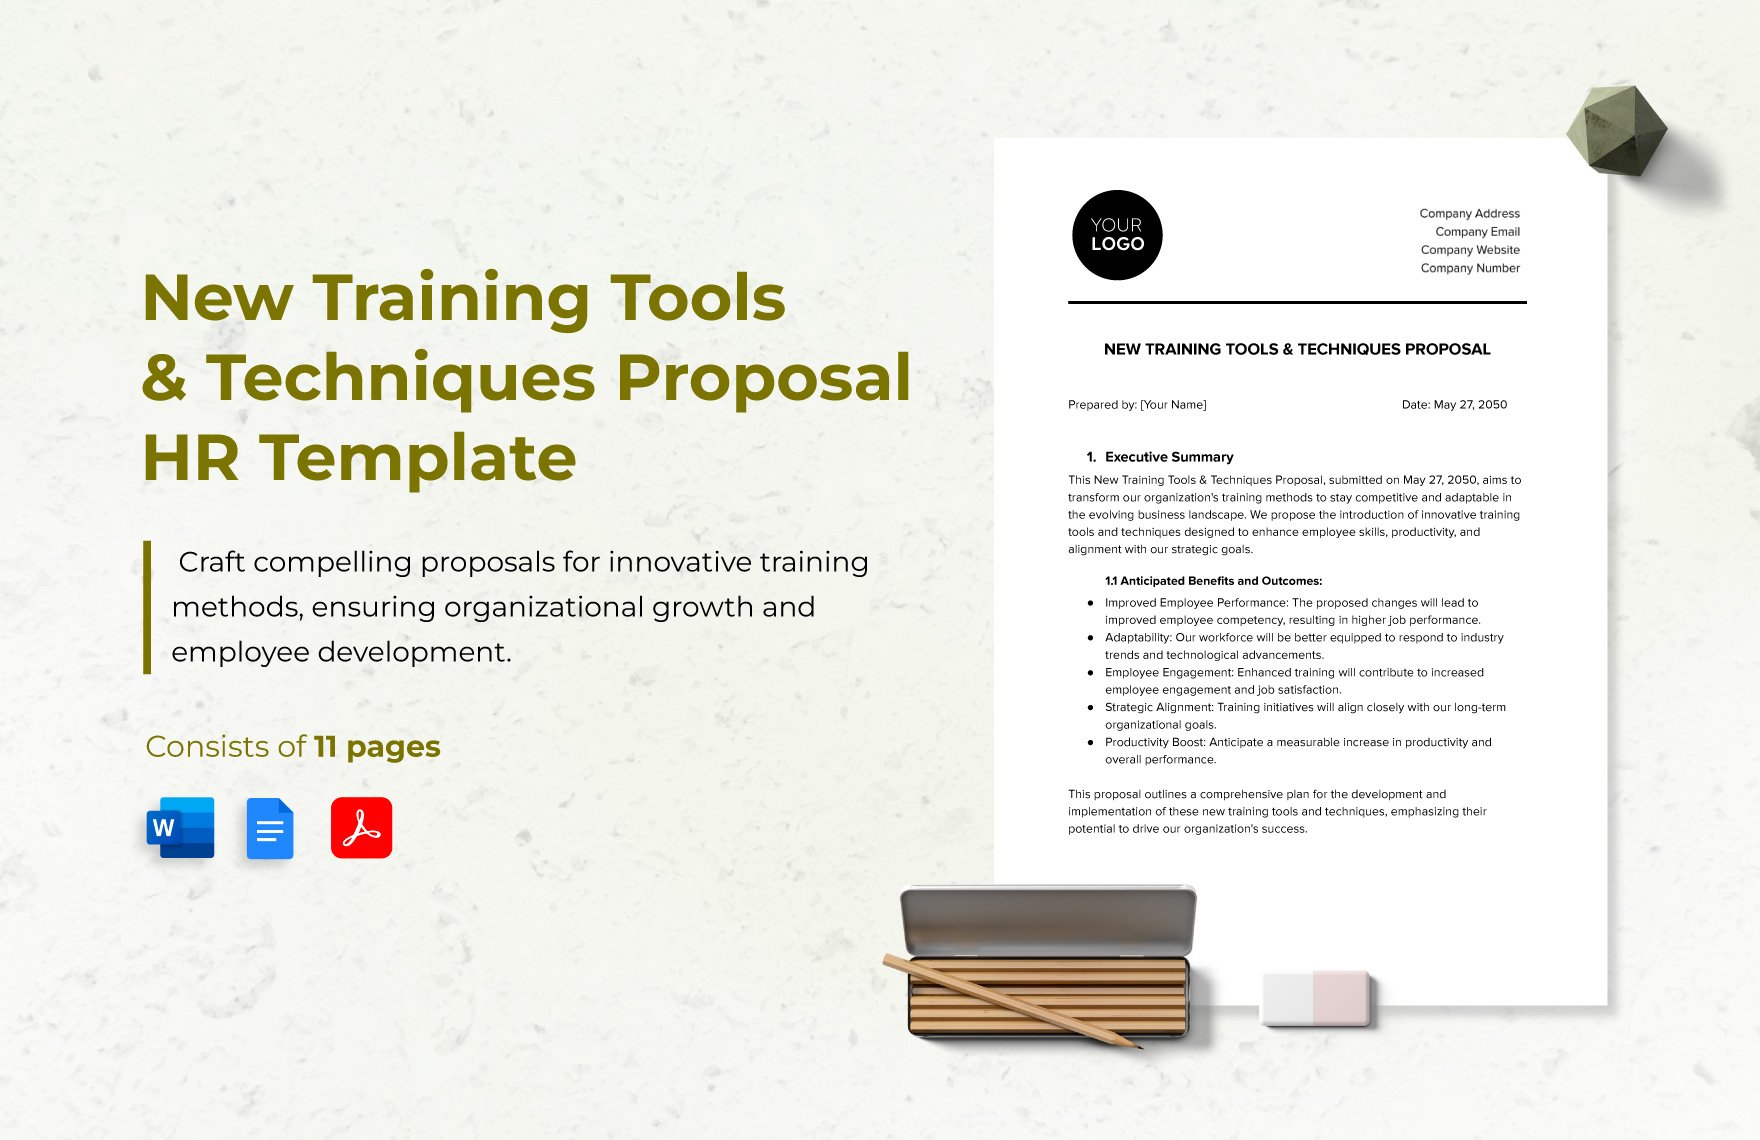 New Training Tools & Techniques Proposal HR Template